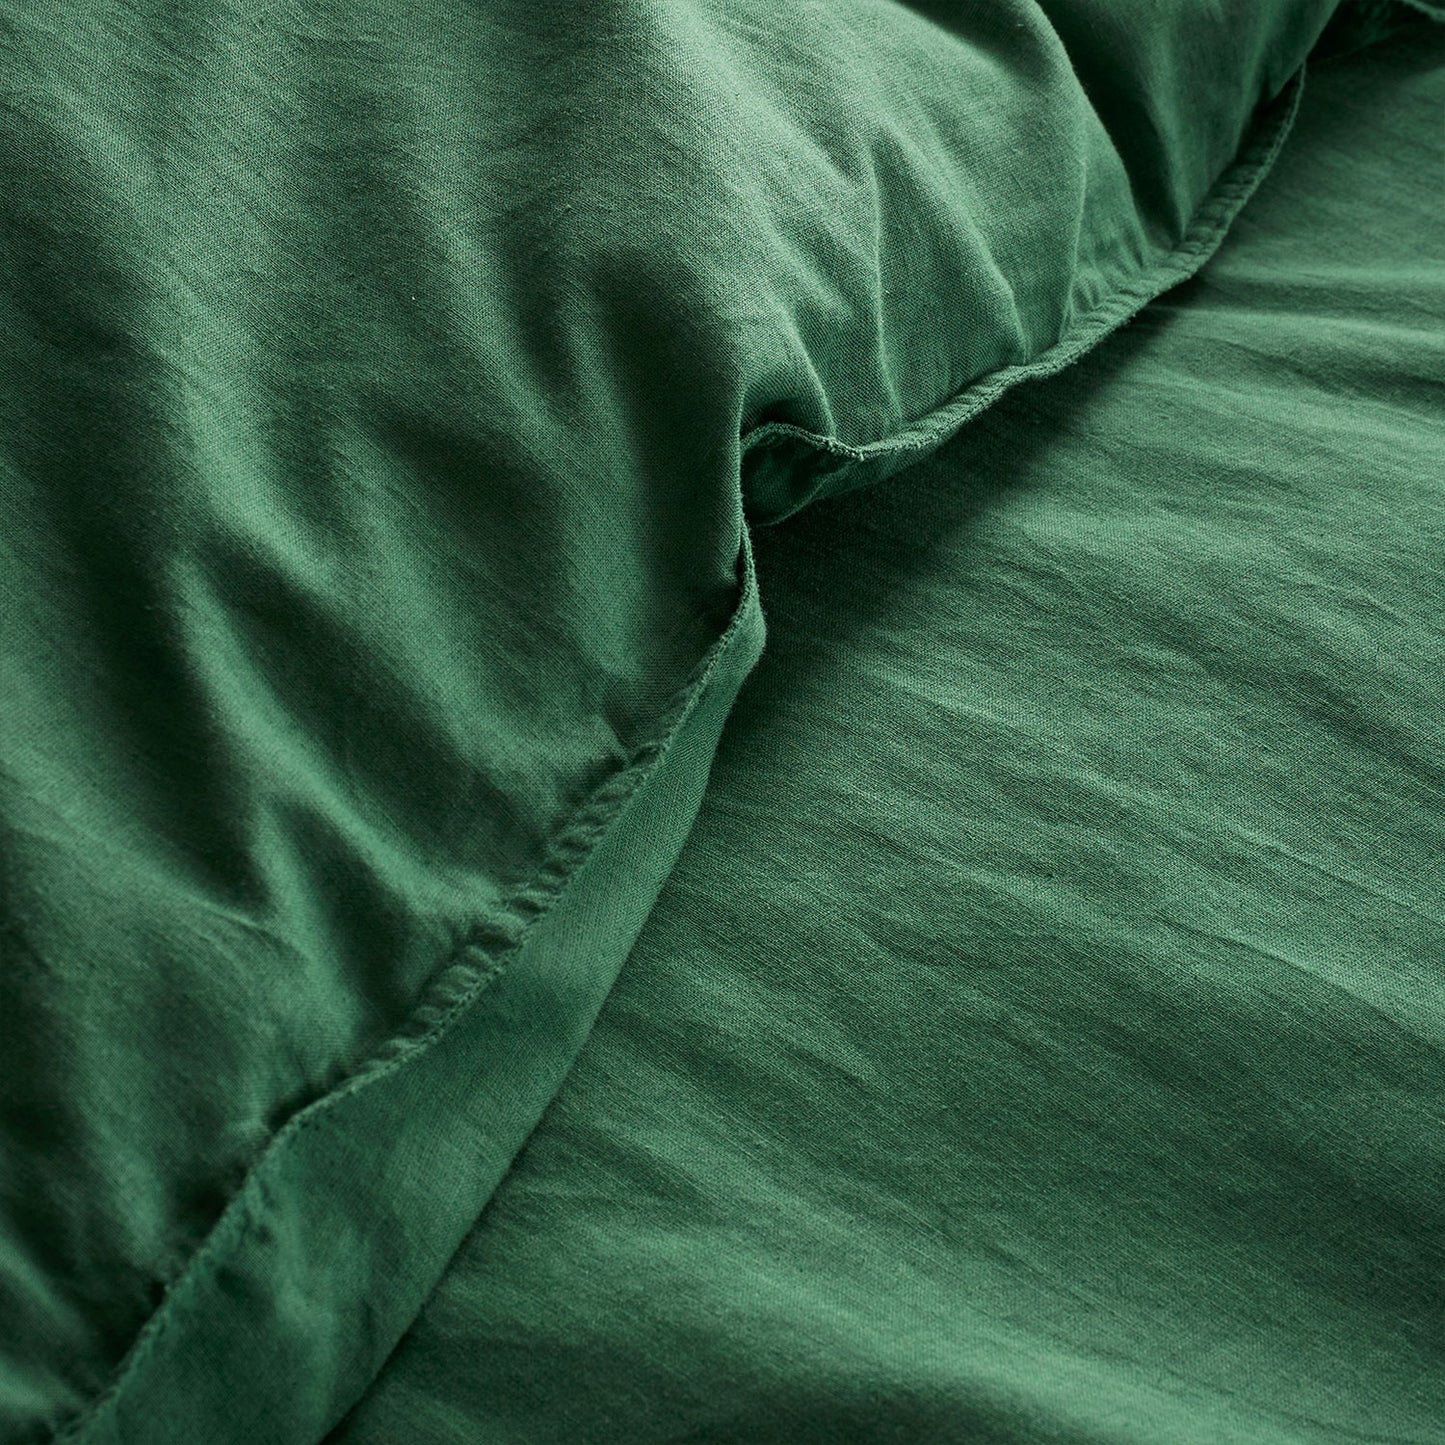 Content By Terence Conran Forest Green Relaxed Cotton Linen Duvet Set